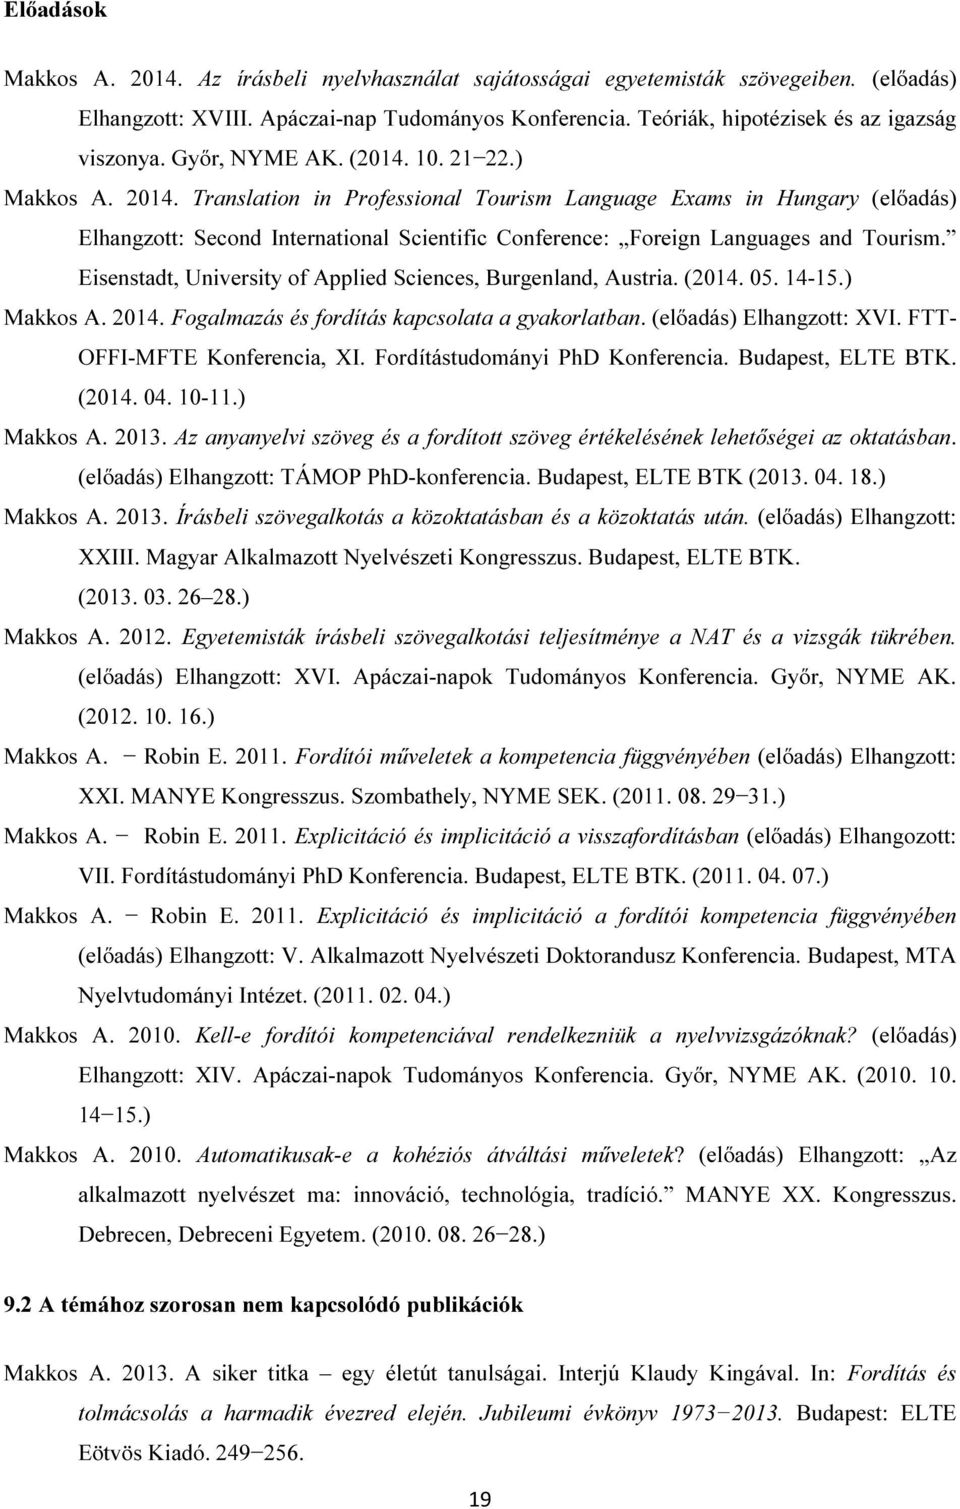 Translation in Professional Tourism Language Exams in Hungary (előadás) Elhangzott: Second International Scientific Conference: Foreign Languages and Tourism.